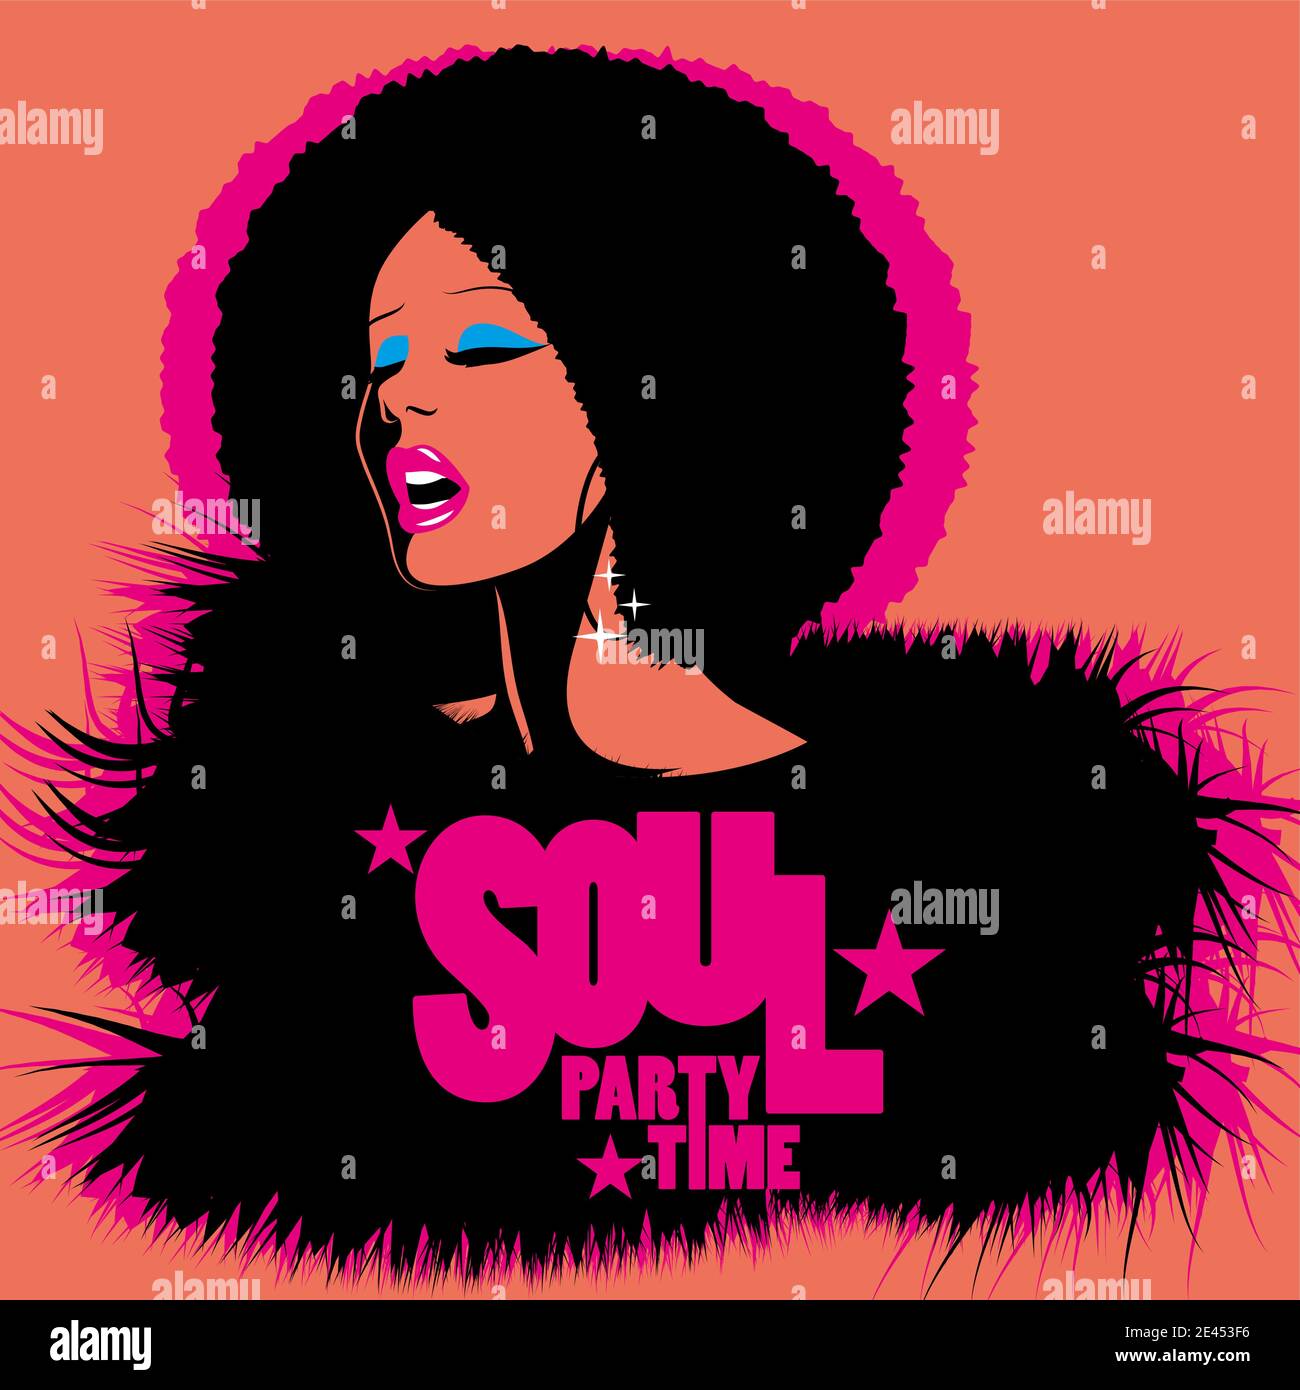 Soul Party Time. Soul, funk, jazz or disco music poster. Beautiful